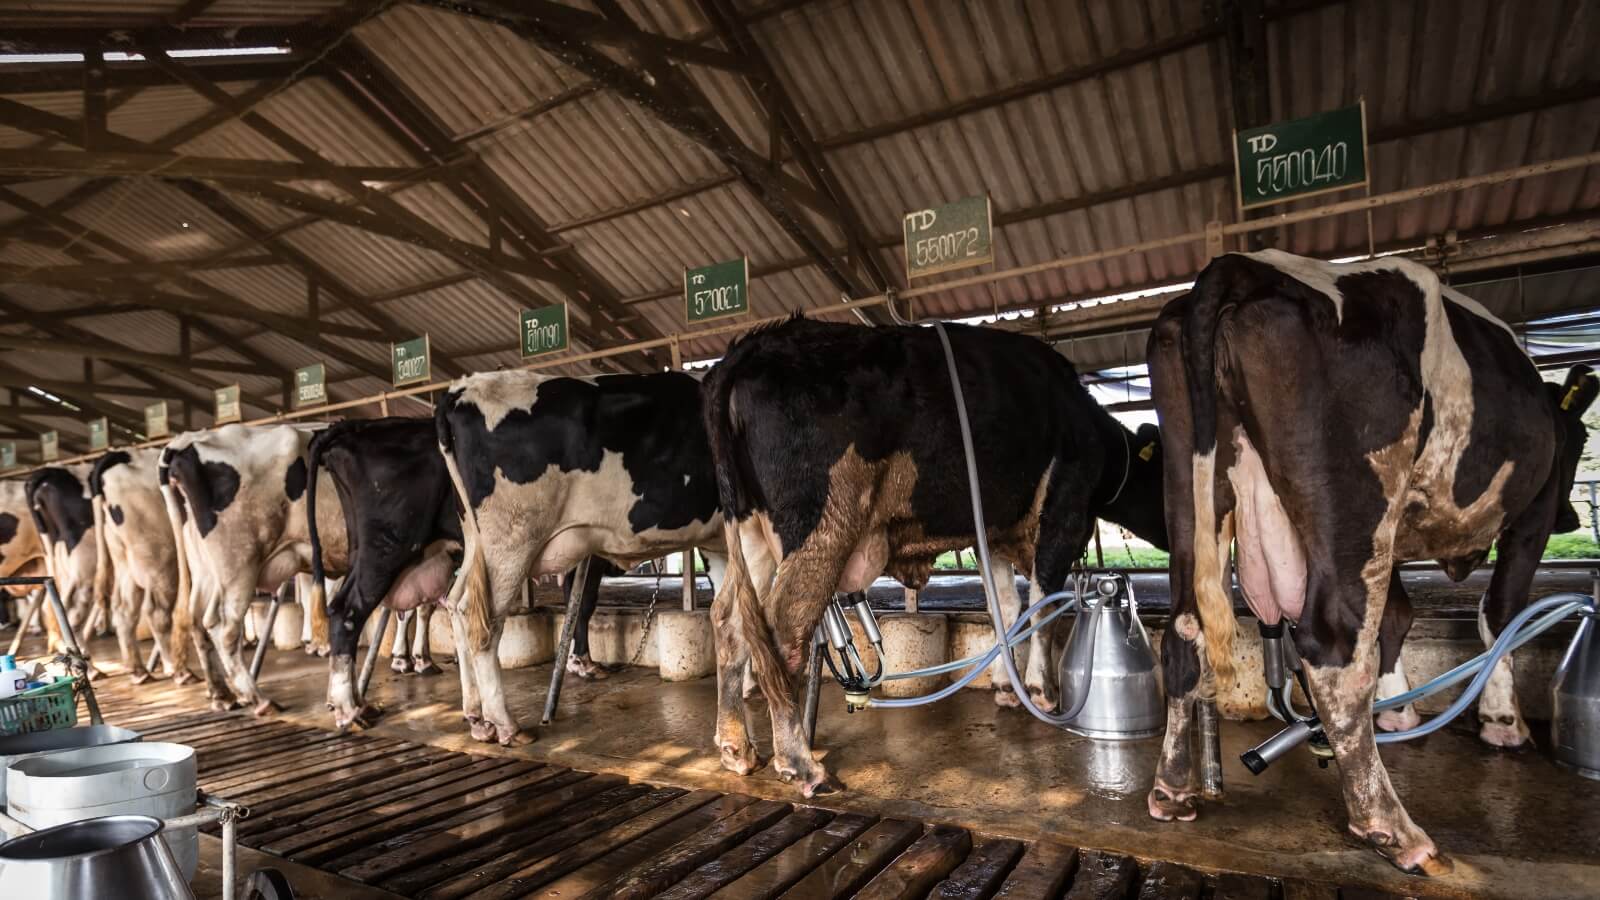 Dairy cows lined up being milked by machines